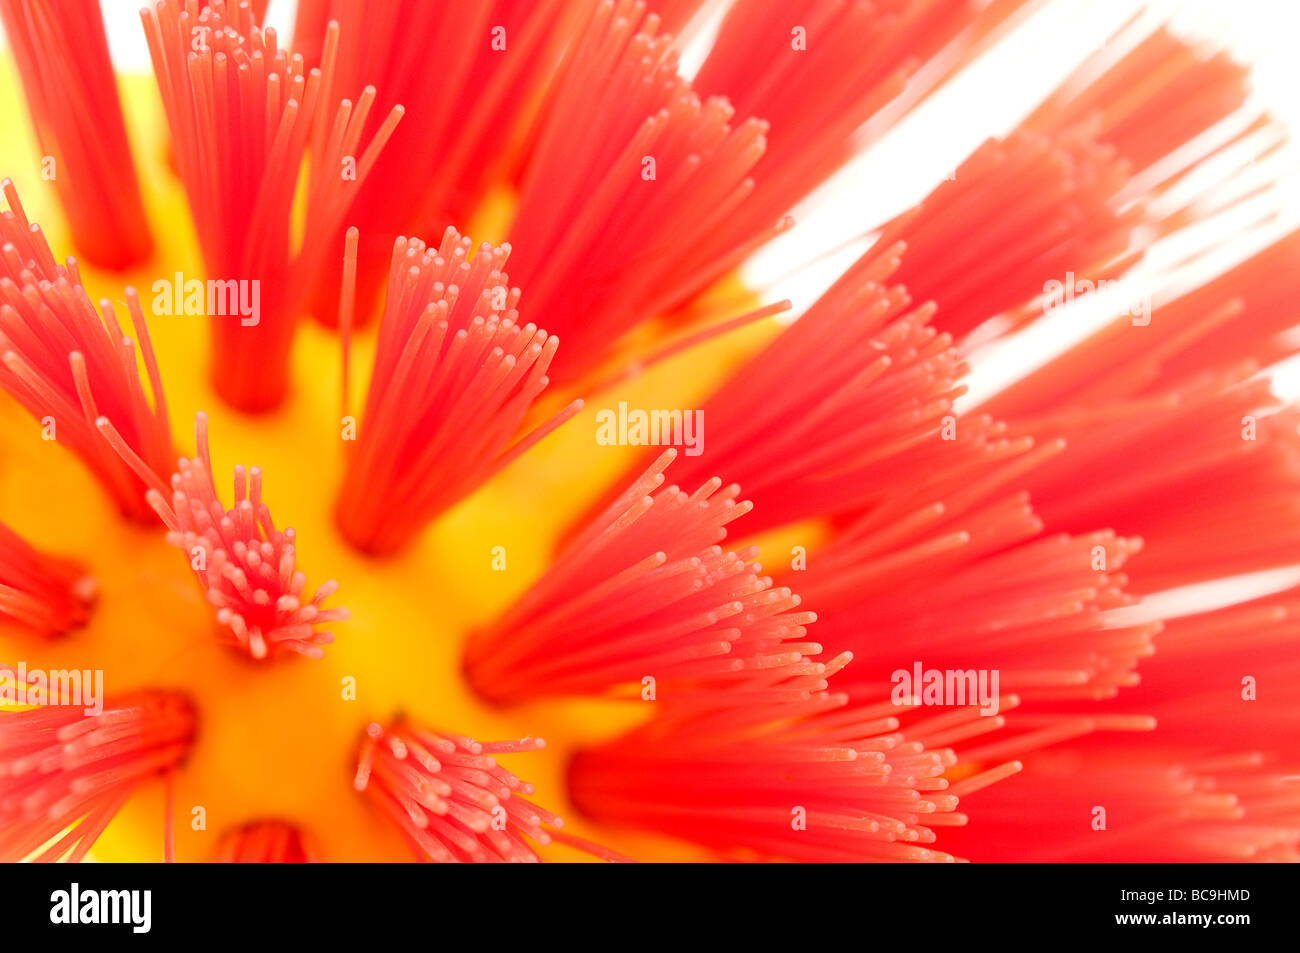 Macro of some synthetic coloured bristles Stock Photo